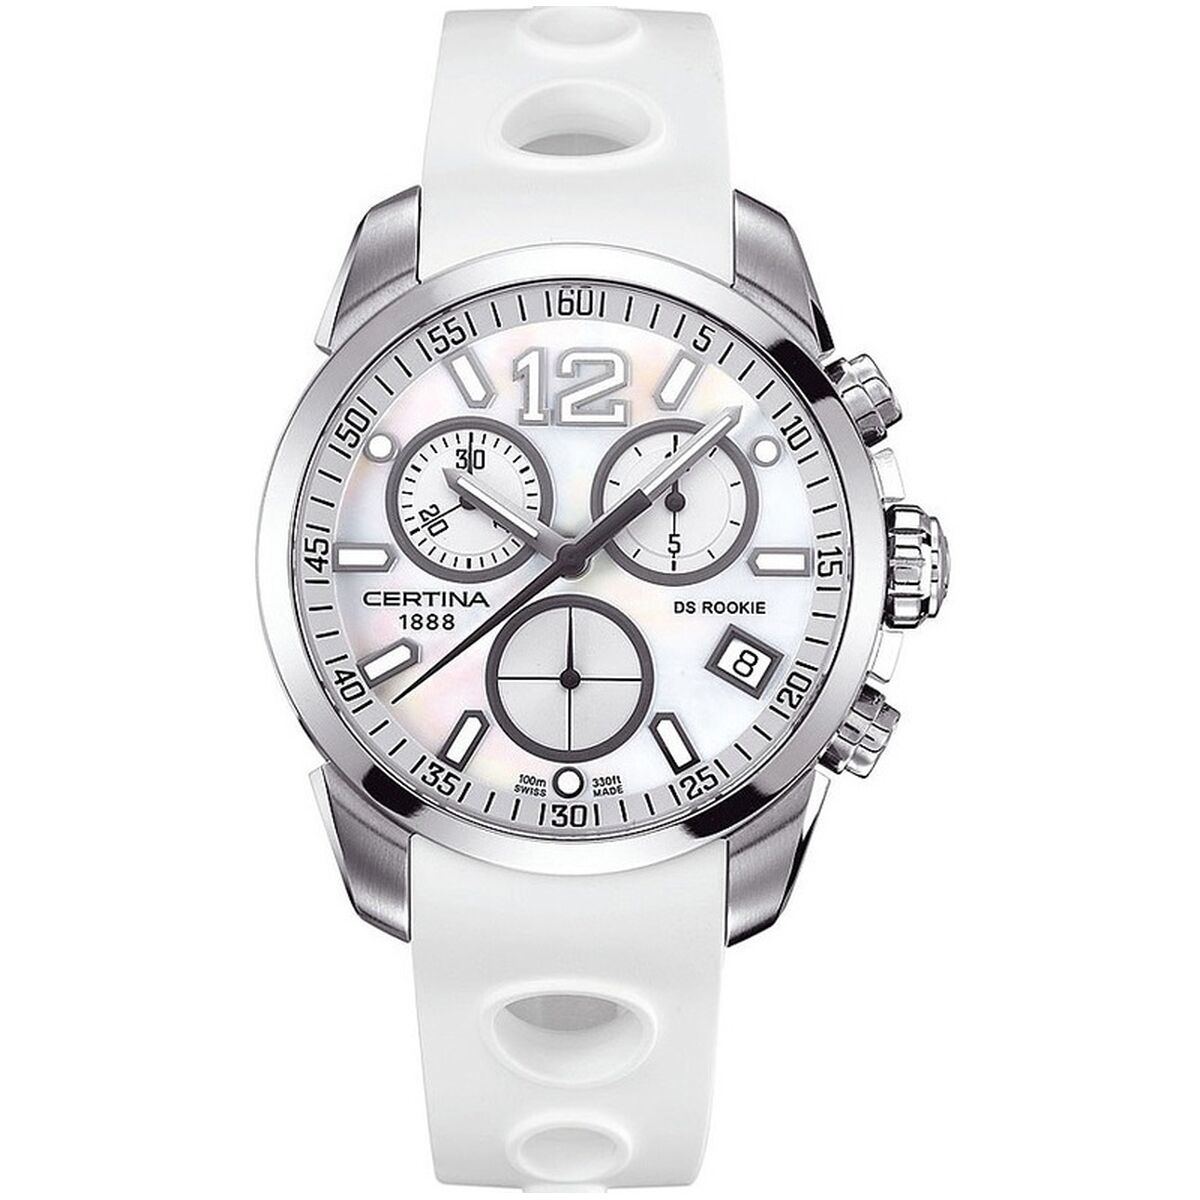 Certina Men's Watch  Ds Rookie Chronograph Mop ( 40 Mm) Gbby2 In White